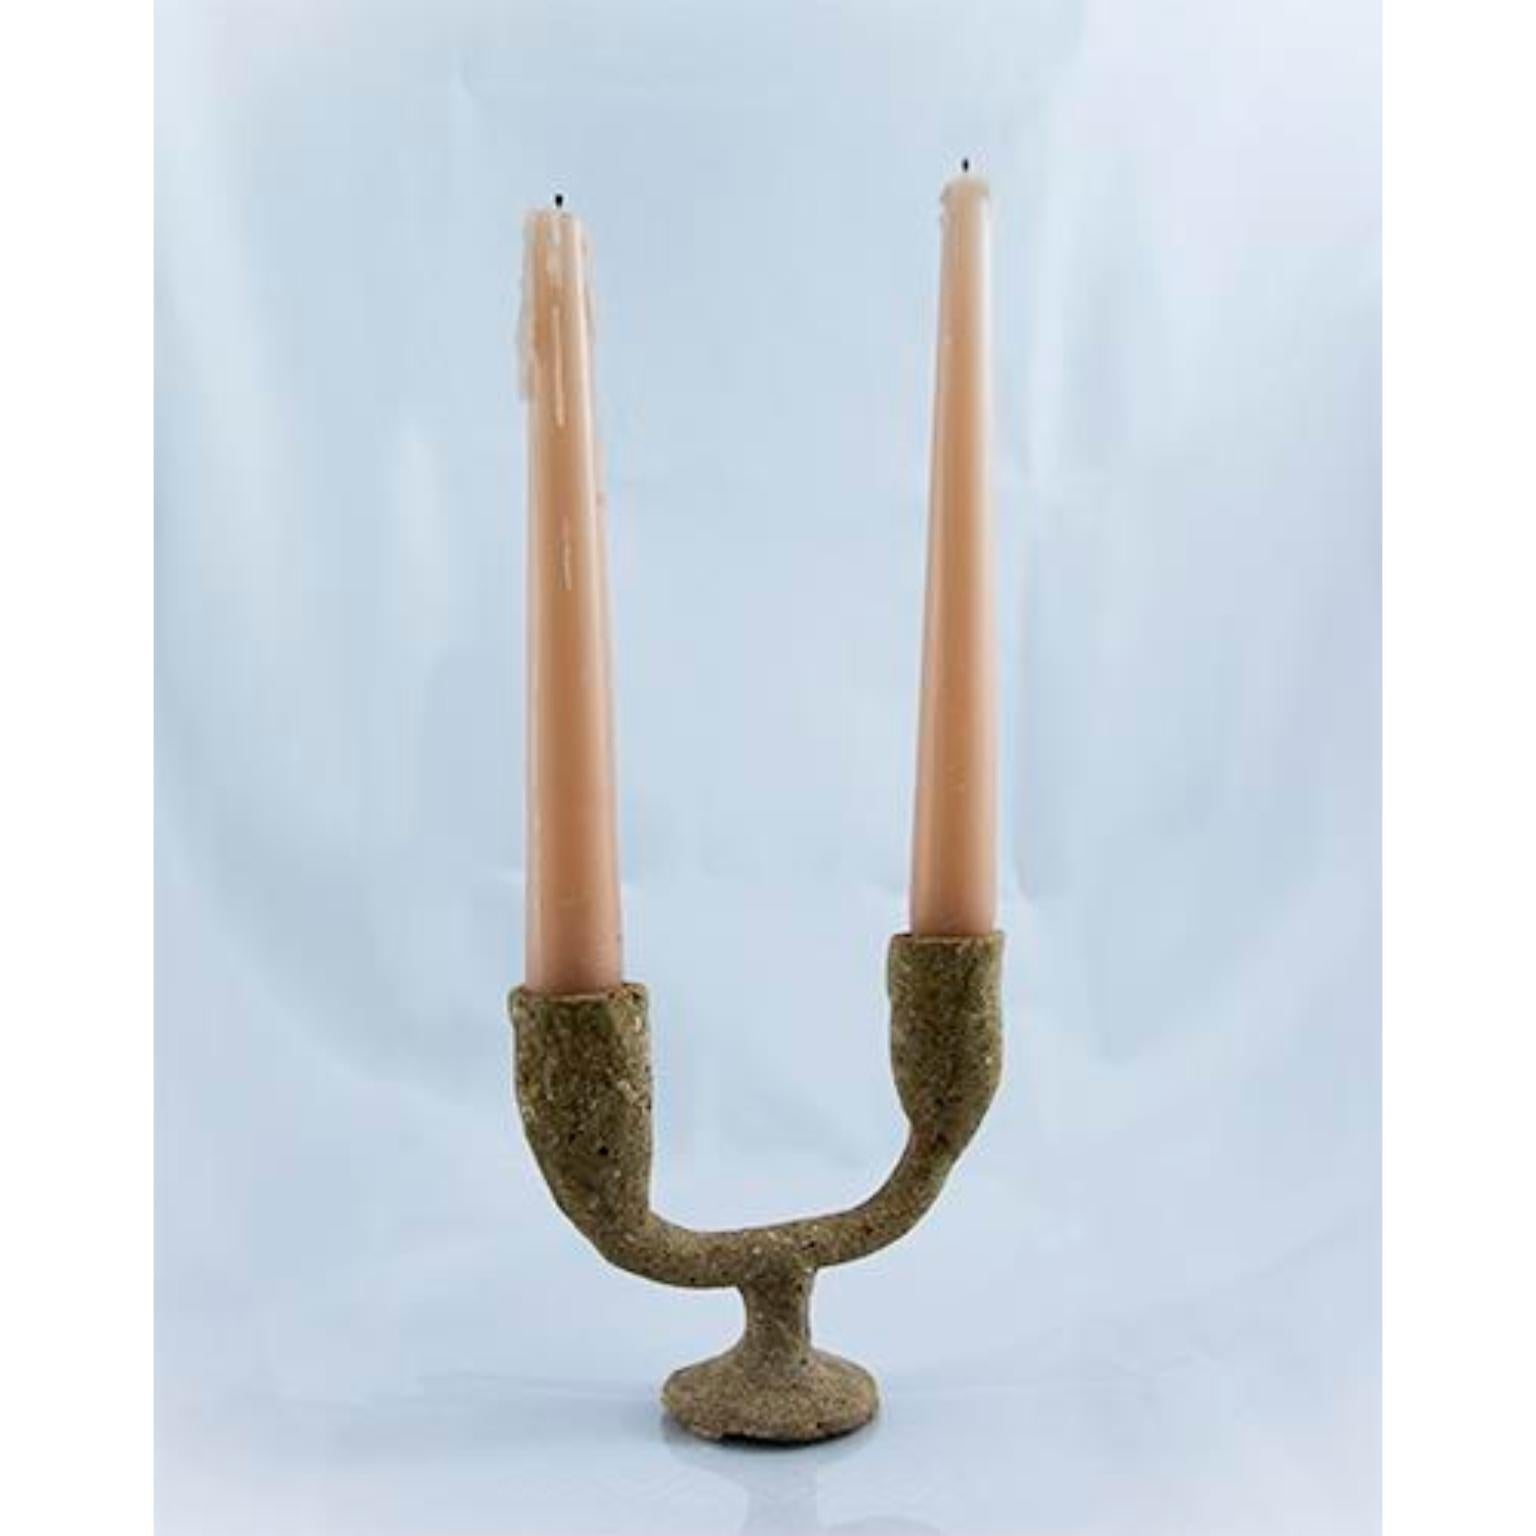 Set of 2 Alimenta candle holder by Riccardo Cenedella
Dimensions: D 9 x W 9 x H 15 cm
Materials: food waste based material

I am Riccardo Cenedella I graduated in Product Design from Politecnico di Torino in 2016 and straight after my graduation